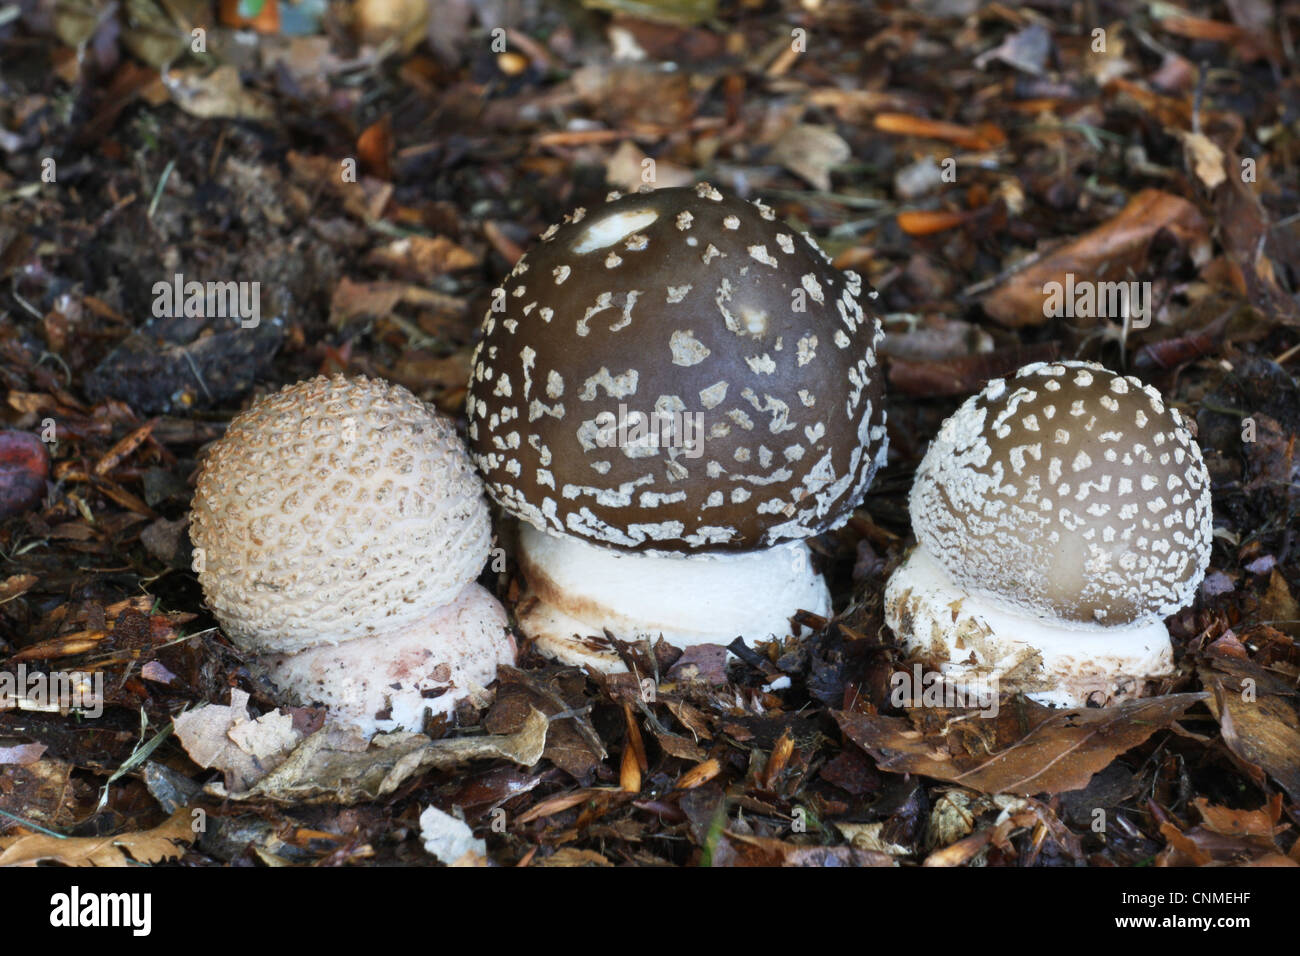 The Blusher (Amanita rubescens) fruiting bodies, growing amongst rotting leaves in woodland, Leicestershire, England, september Stock Photo